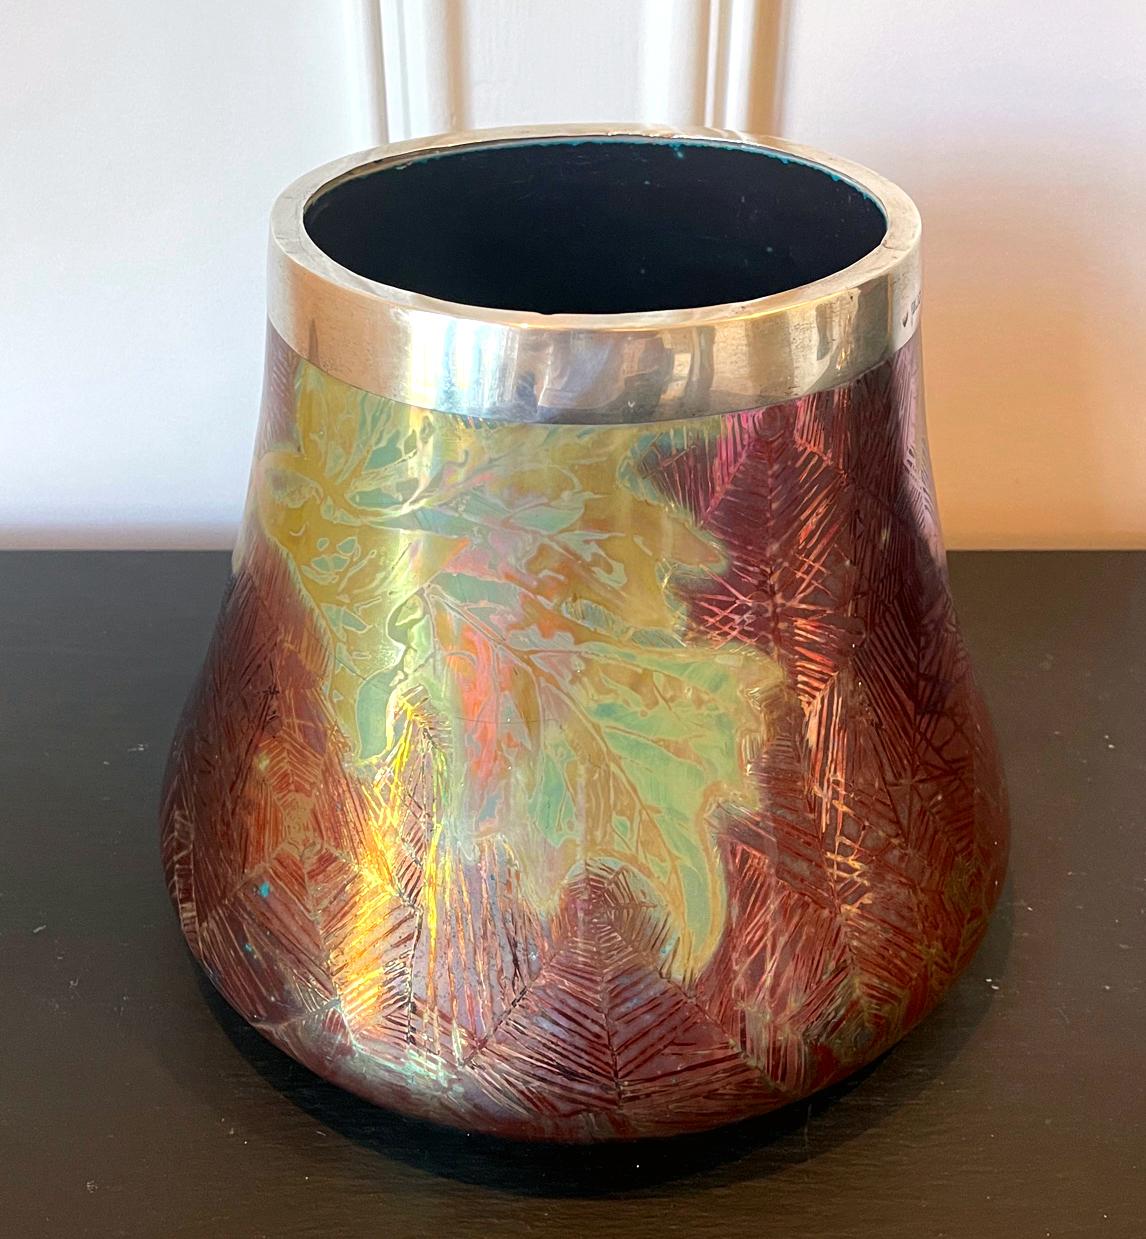 A ceramic vase with iridescent glaze in the shape of an elephant foot cache pot by the legendary French ceramist Pierre Clement Massier (1845-1917). Massier is widely considered as the founder the modern ceramic industry of Vallauris, Southern